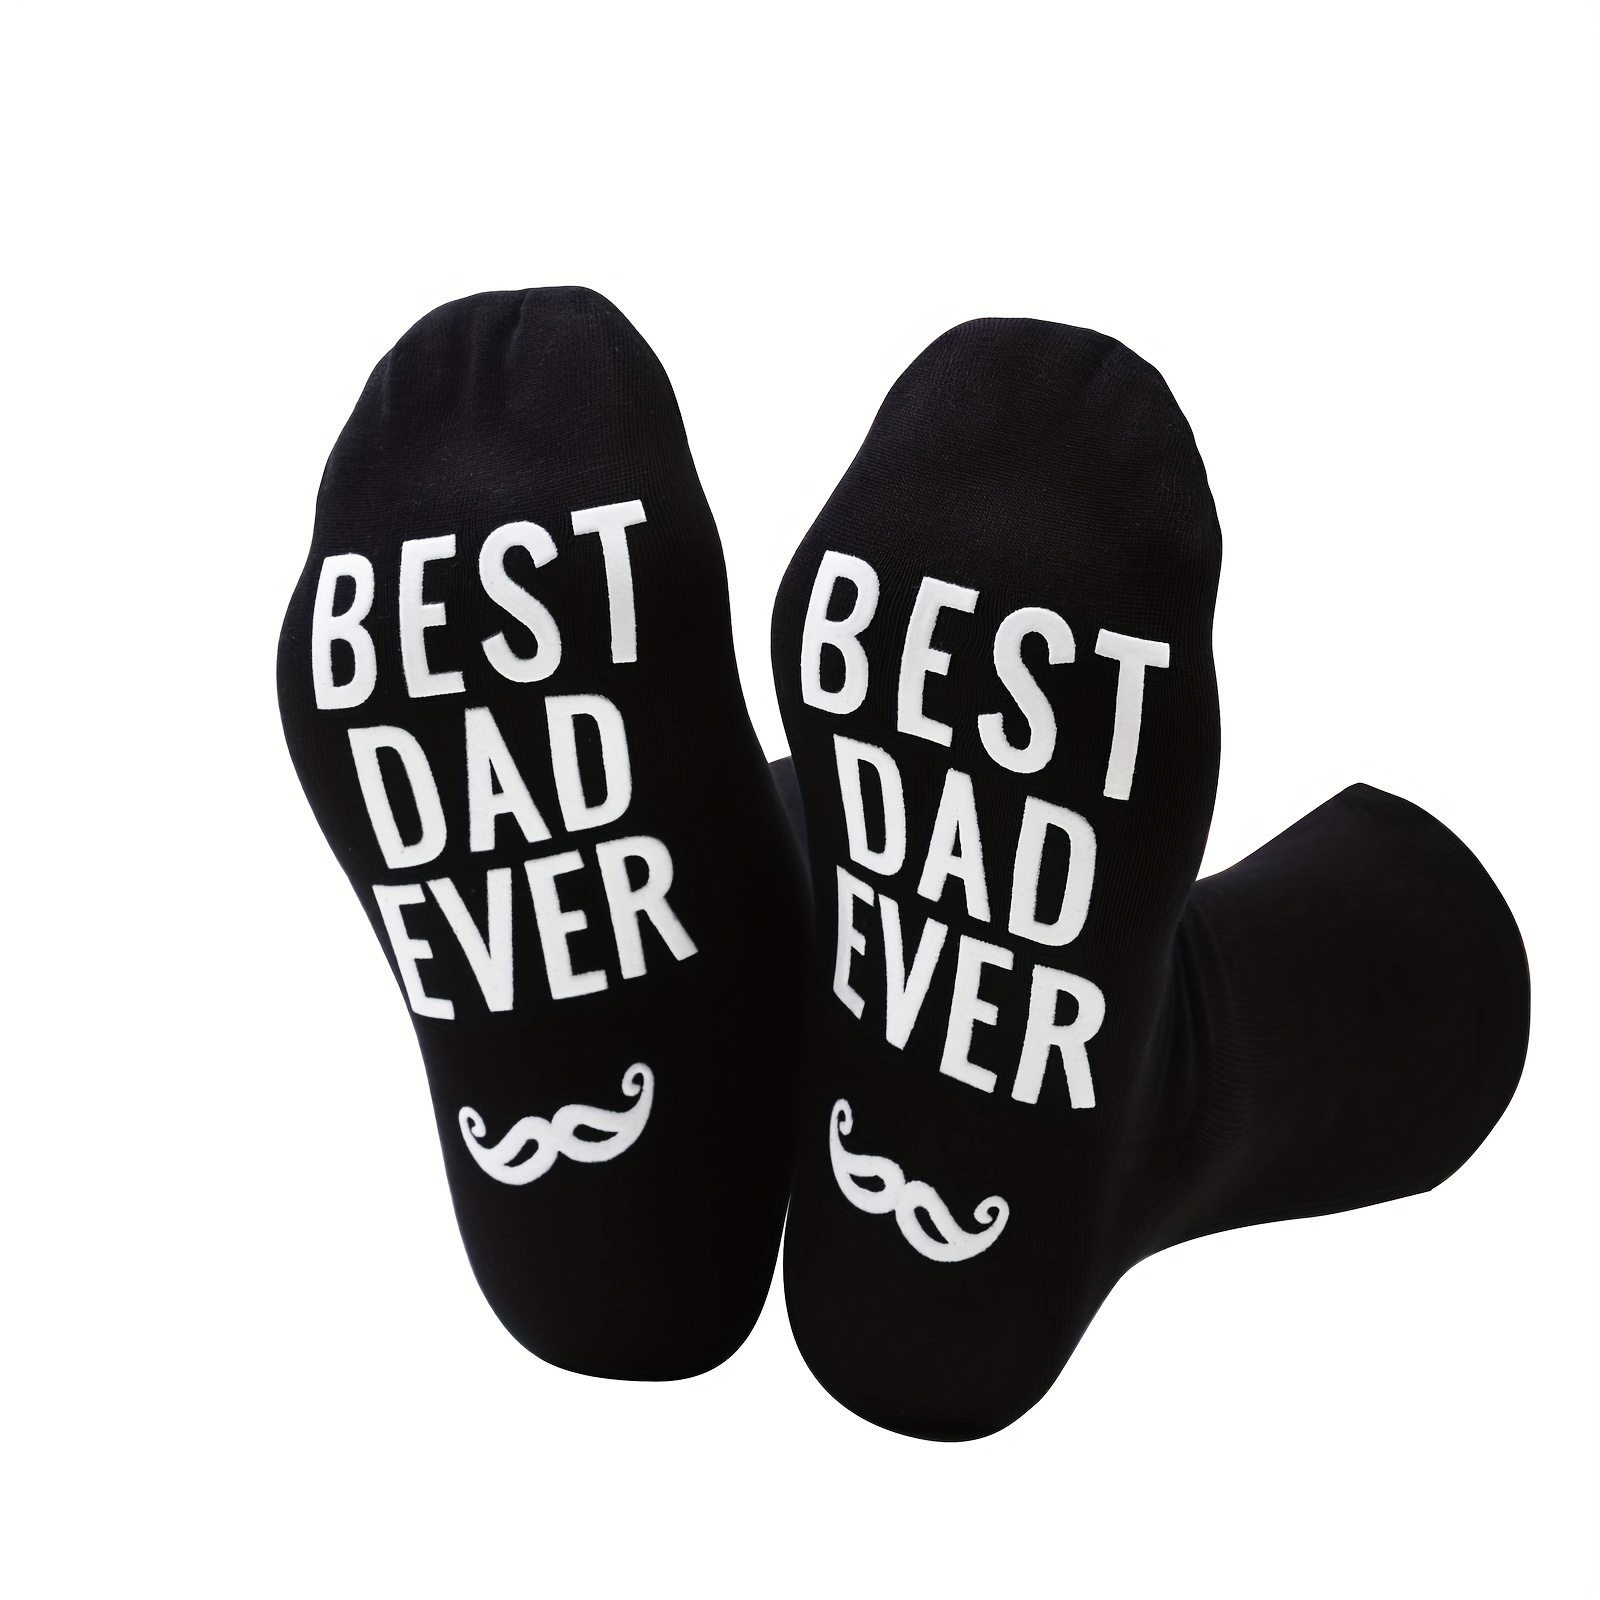 

' Best Dad Ever ' Print Novelty Fun Cotton Blend Comfortable Crew Socks, Birthday Gift For Father From Daughter Son Father's Day Present For Dad